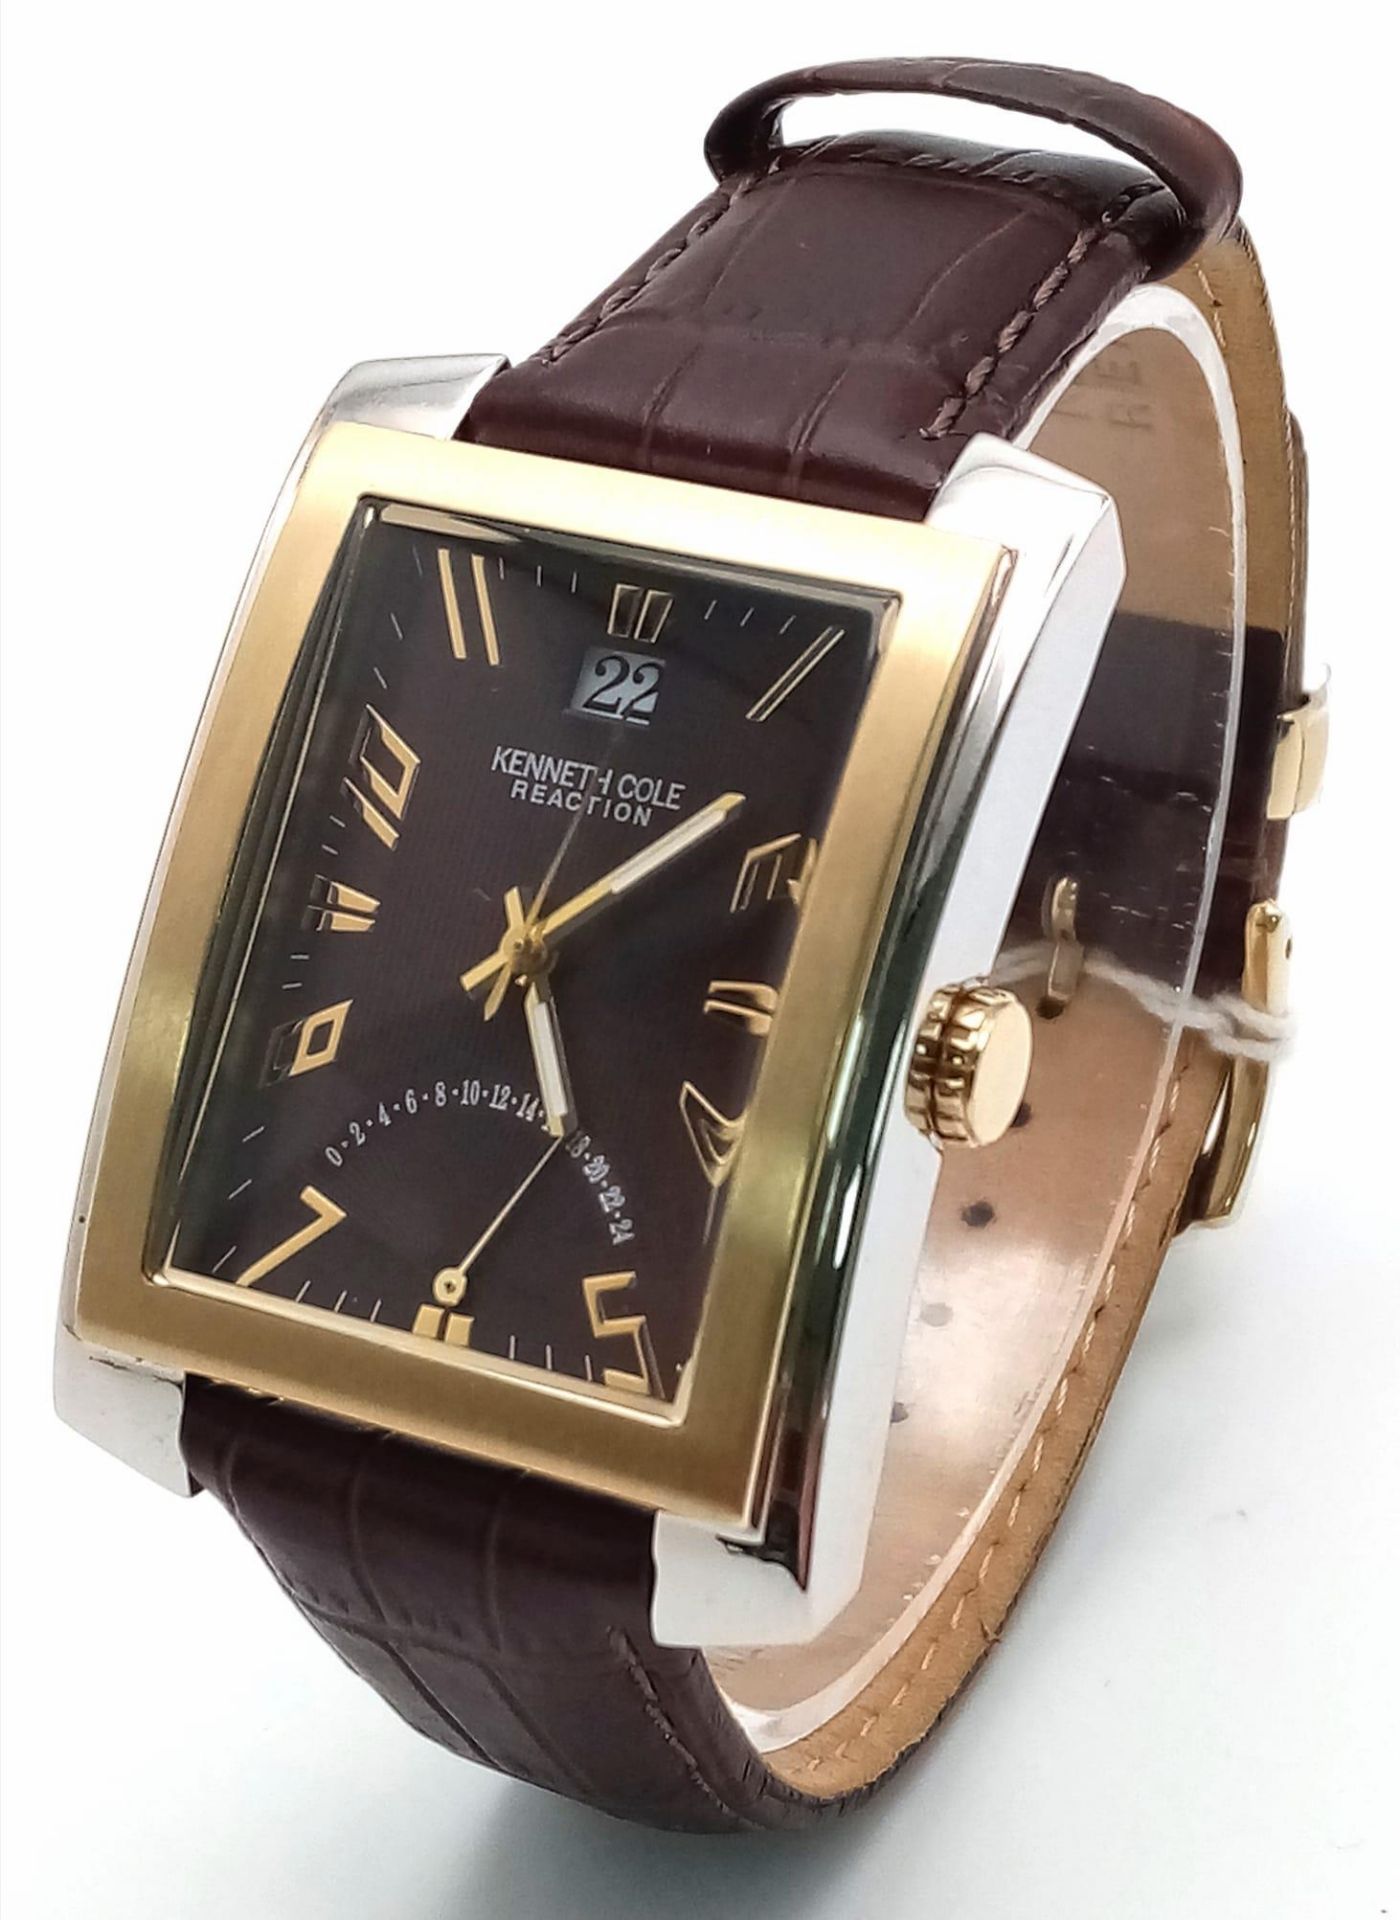 A New (Ex Display) Kenneth Cole, New York Tank Style Watch ‘Reaction’ Model. Two Tone Case, Brown